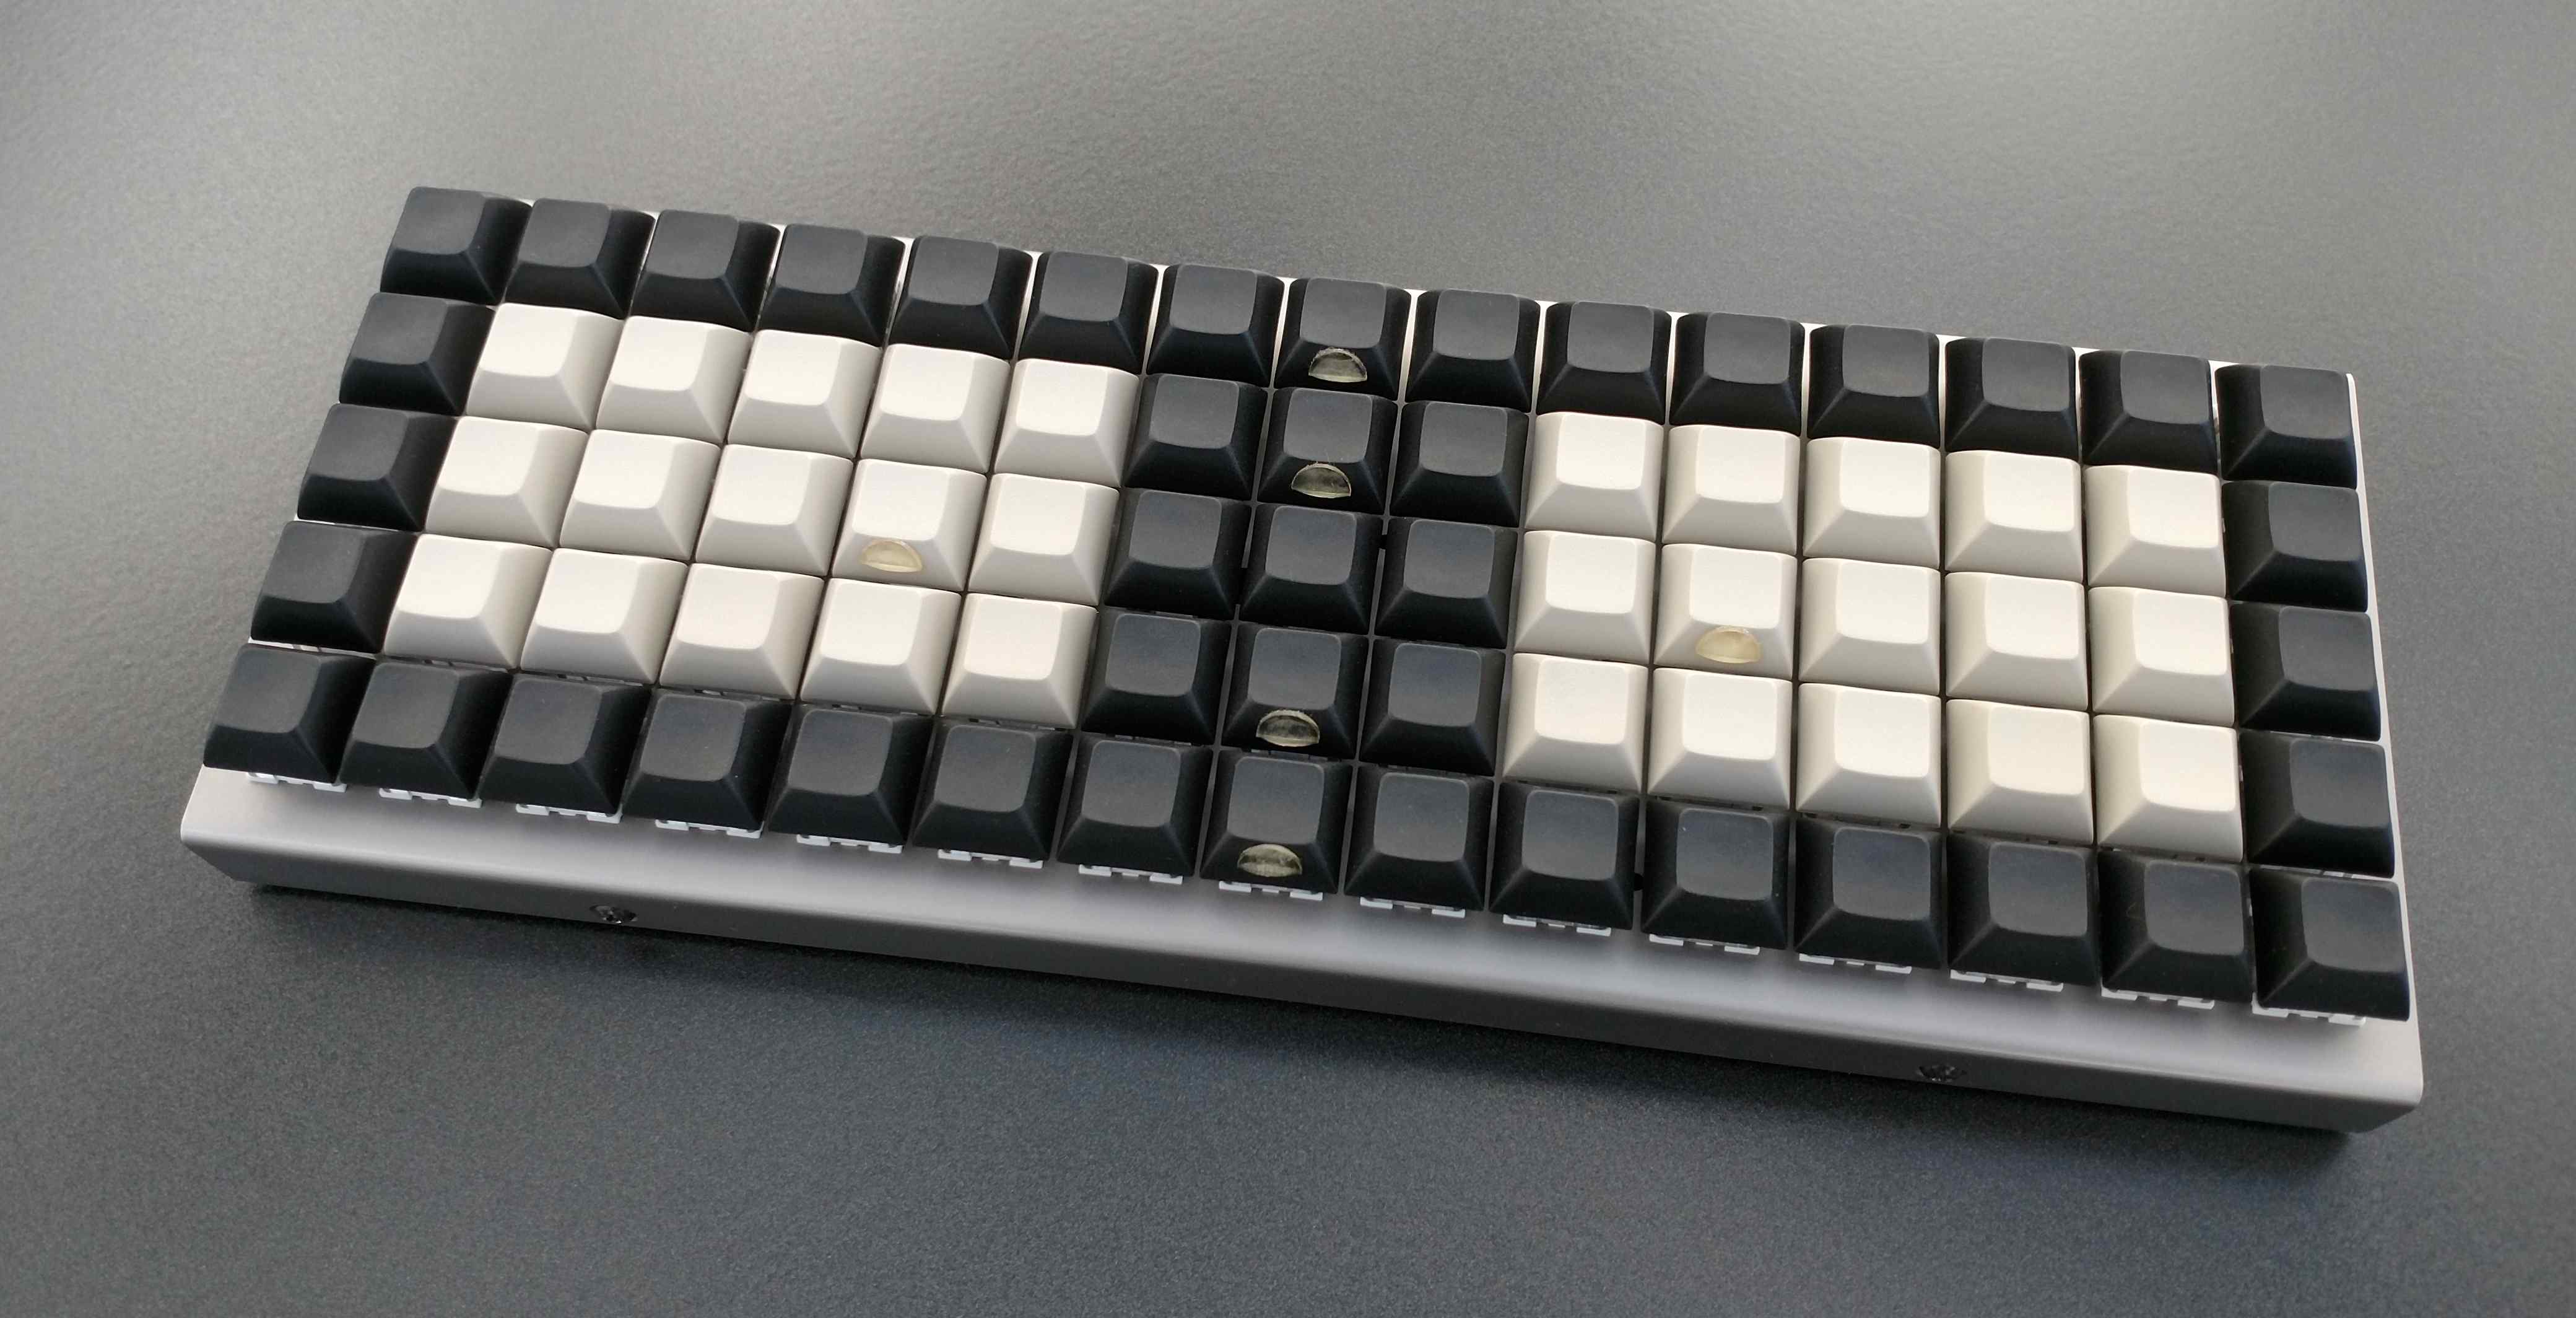 XD75 with DSA keycaps featuring 75 keys in a grid layout and a stainless steel case